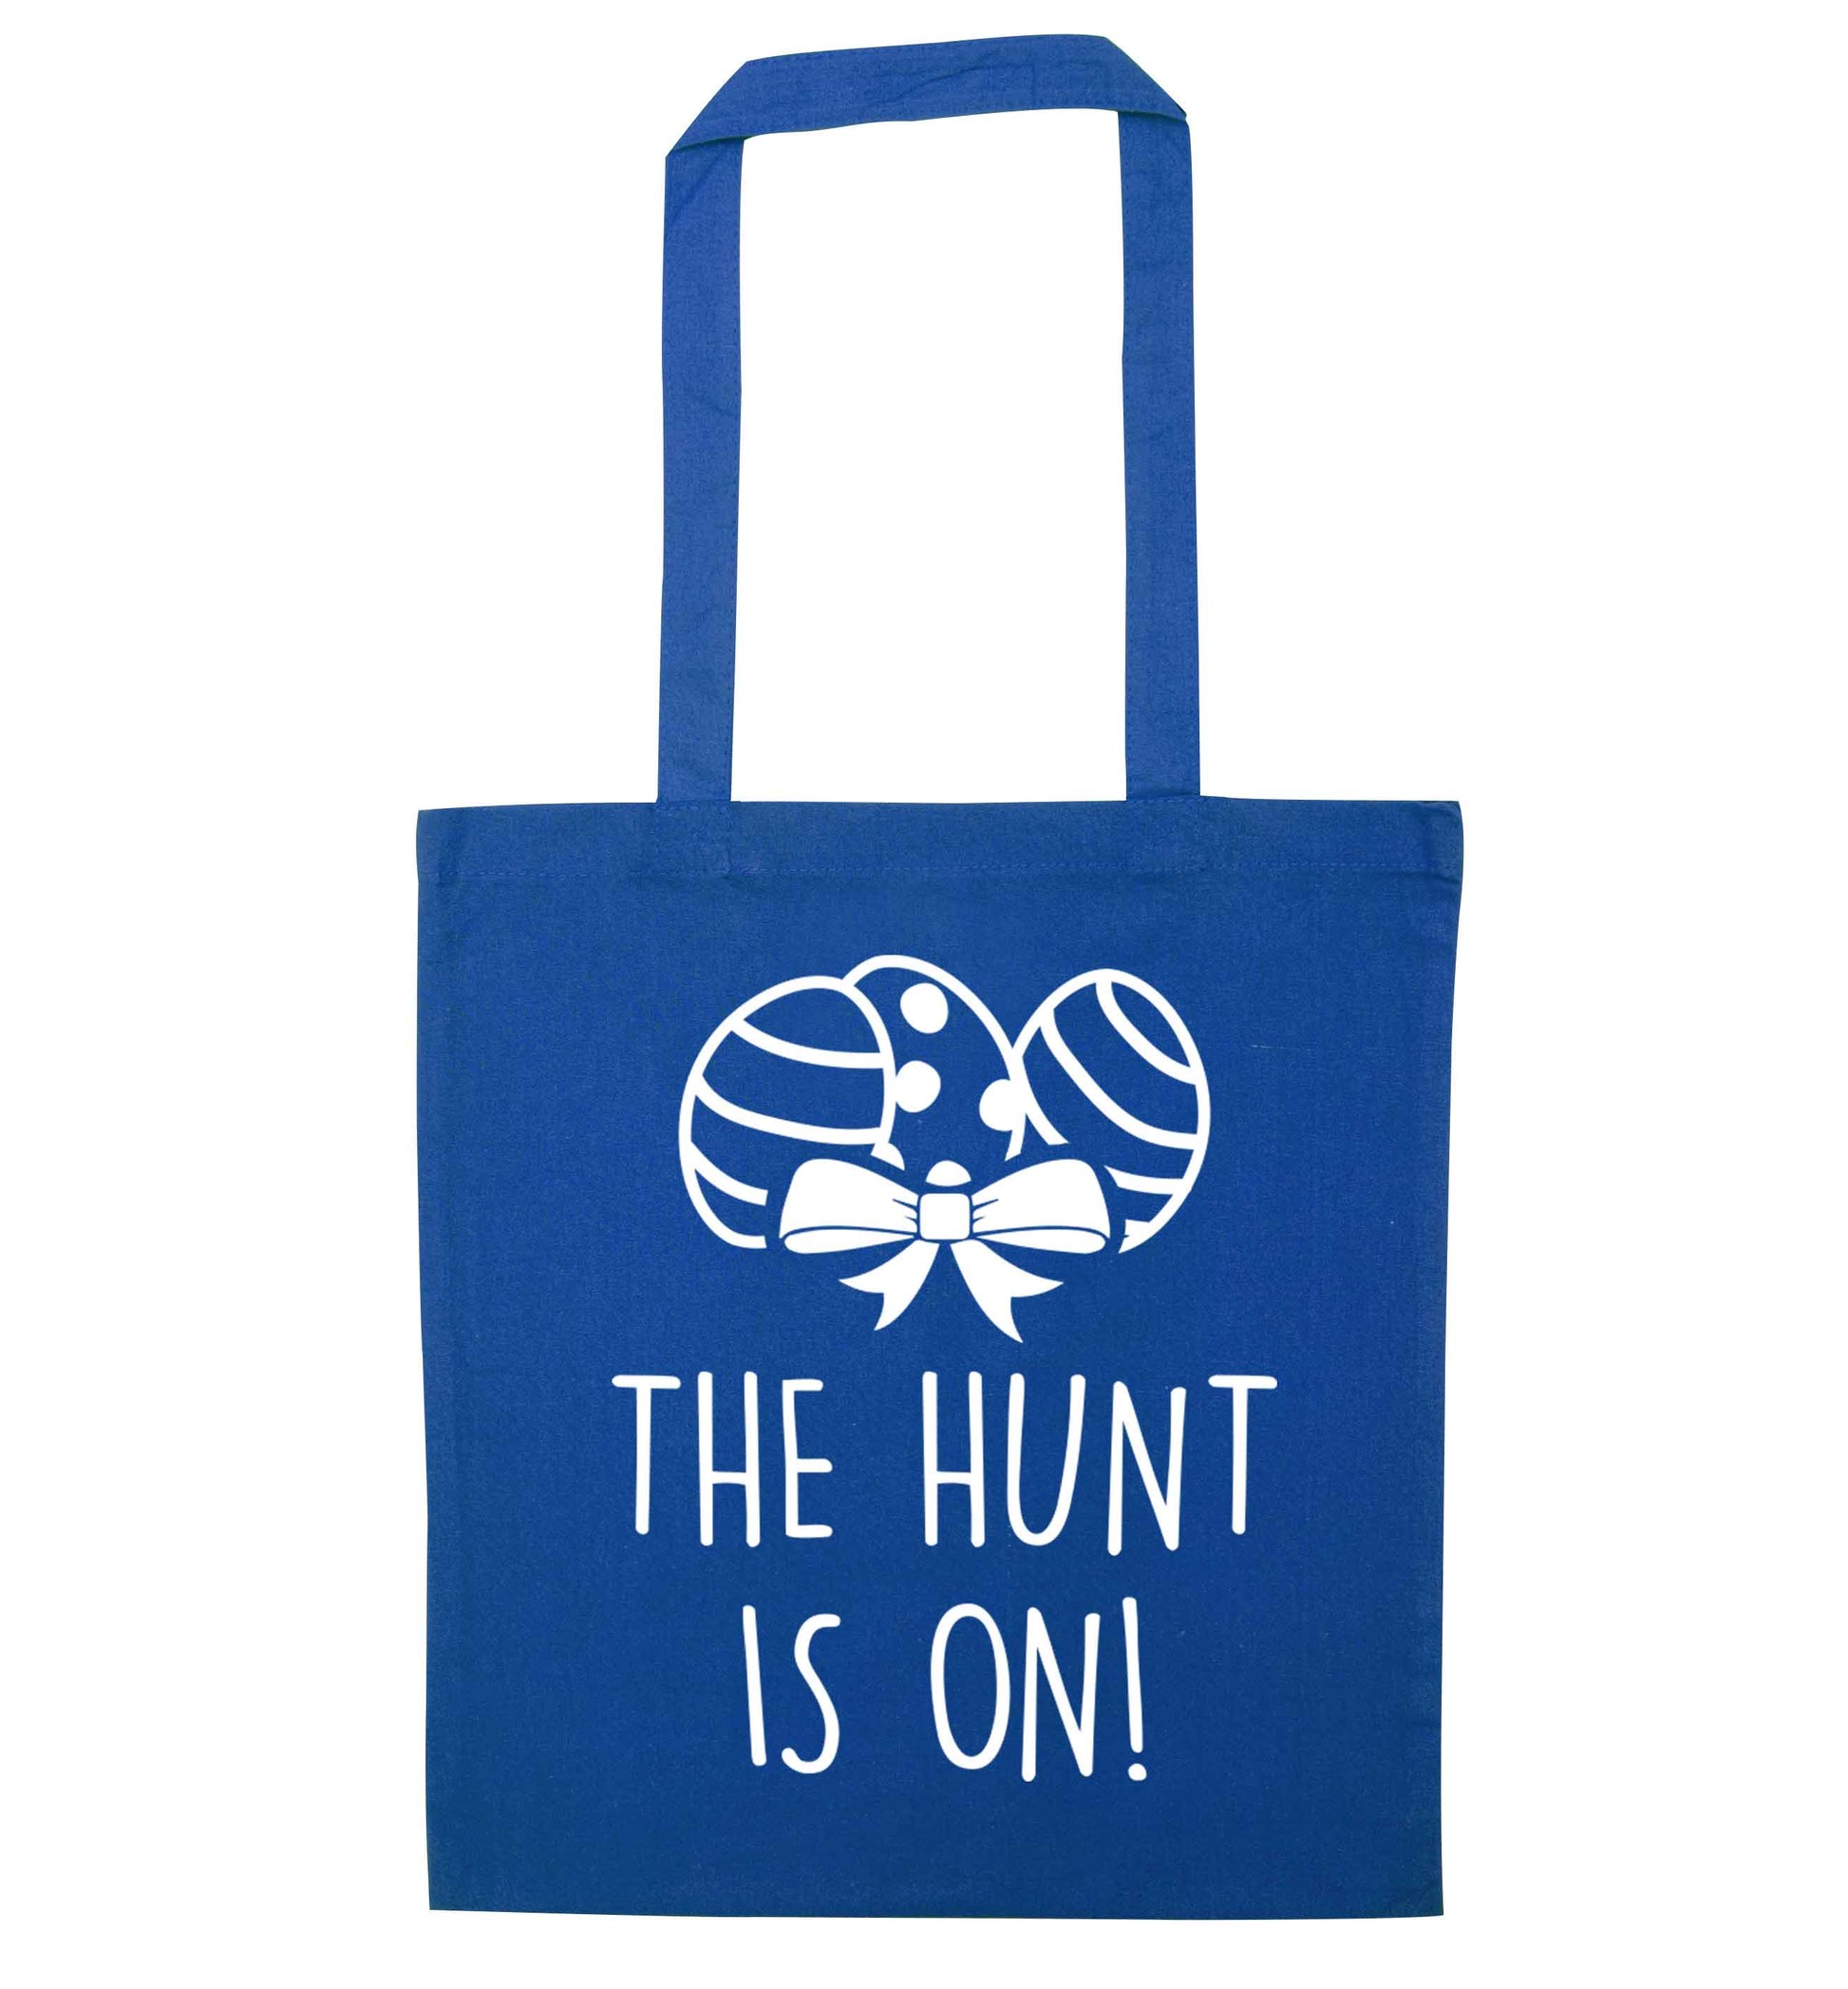 The hunt is on blue tote bag